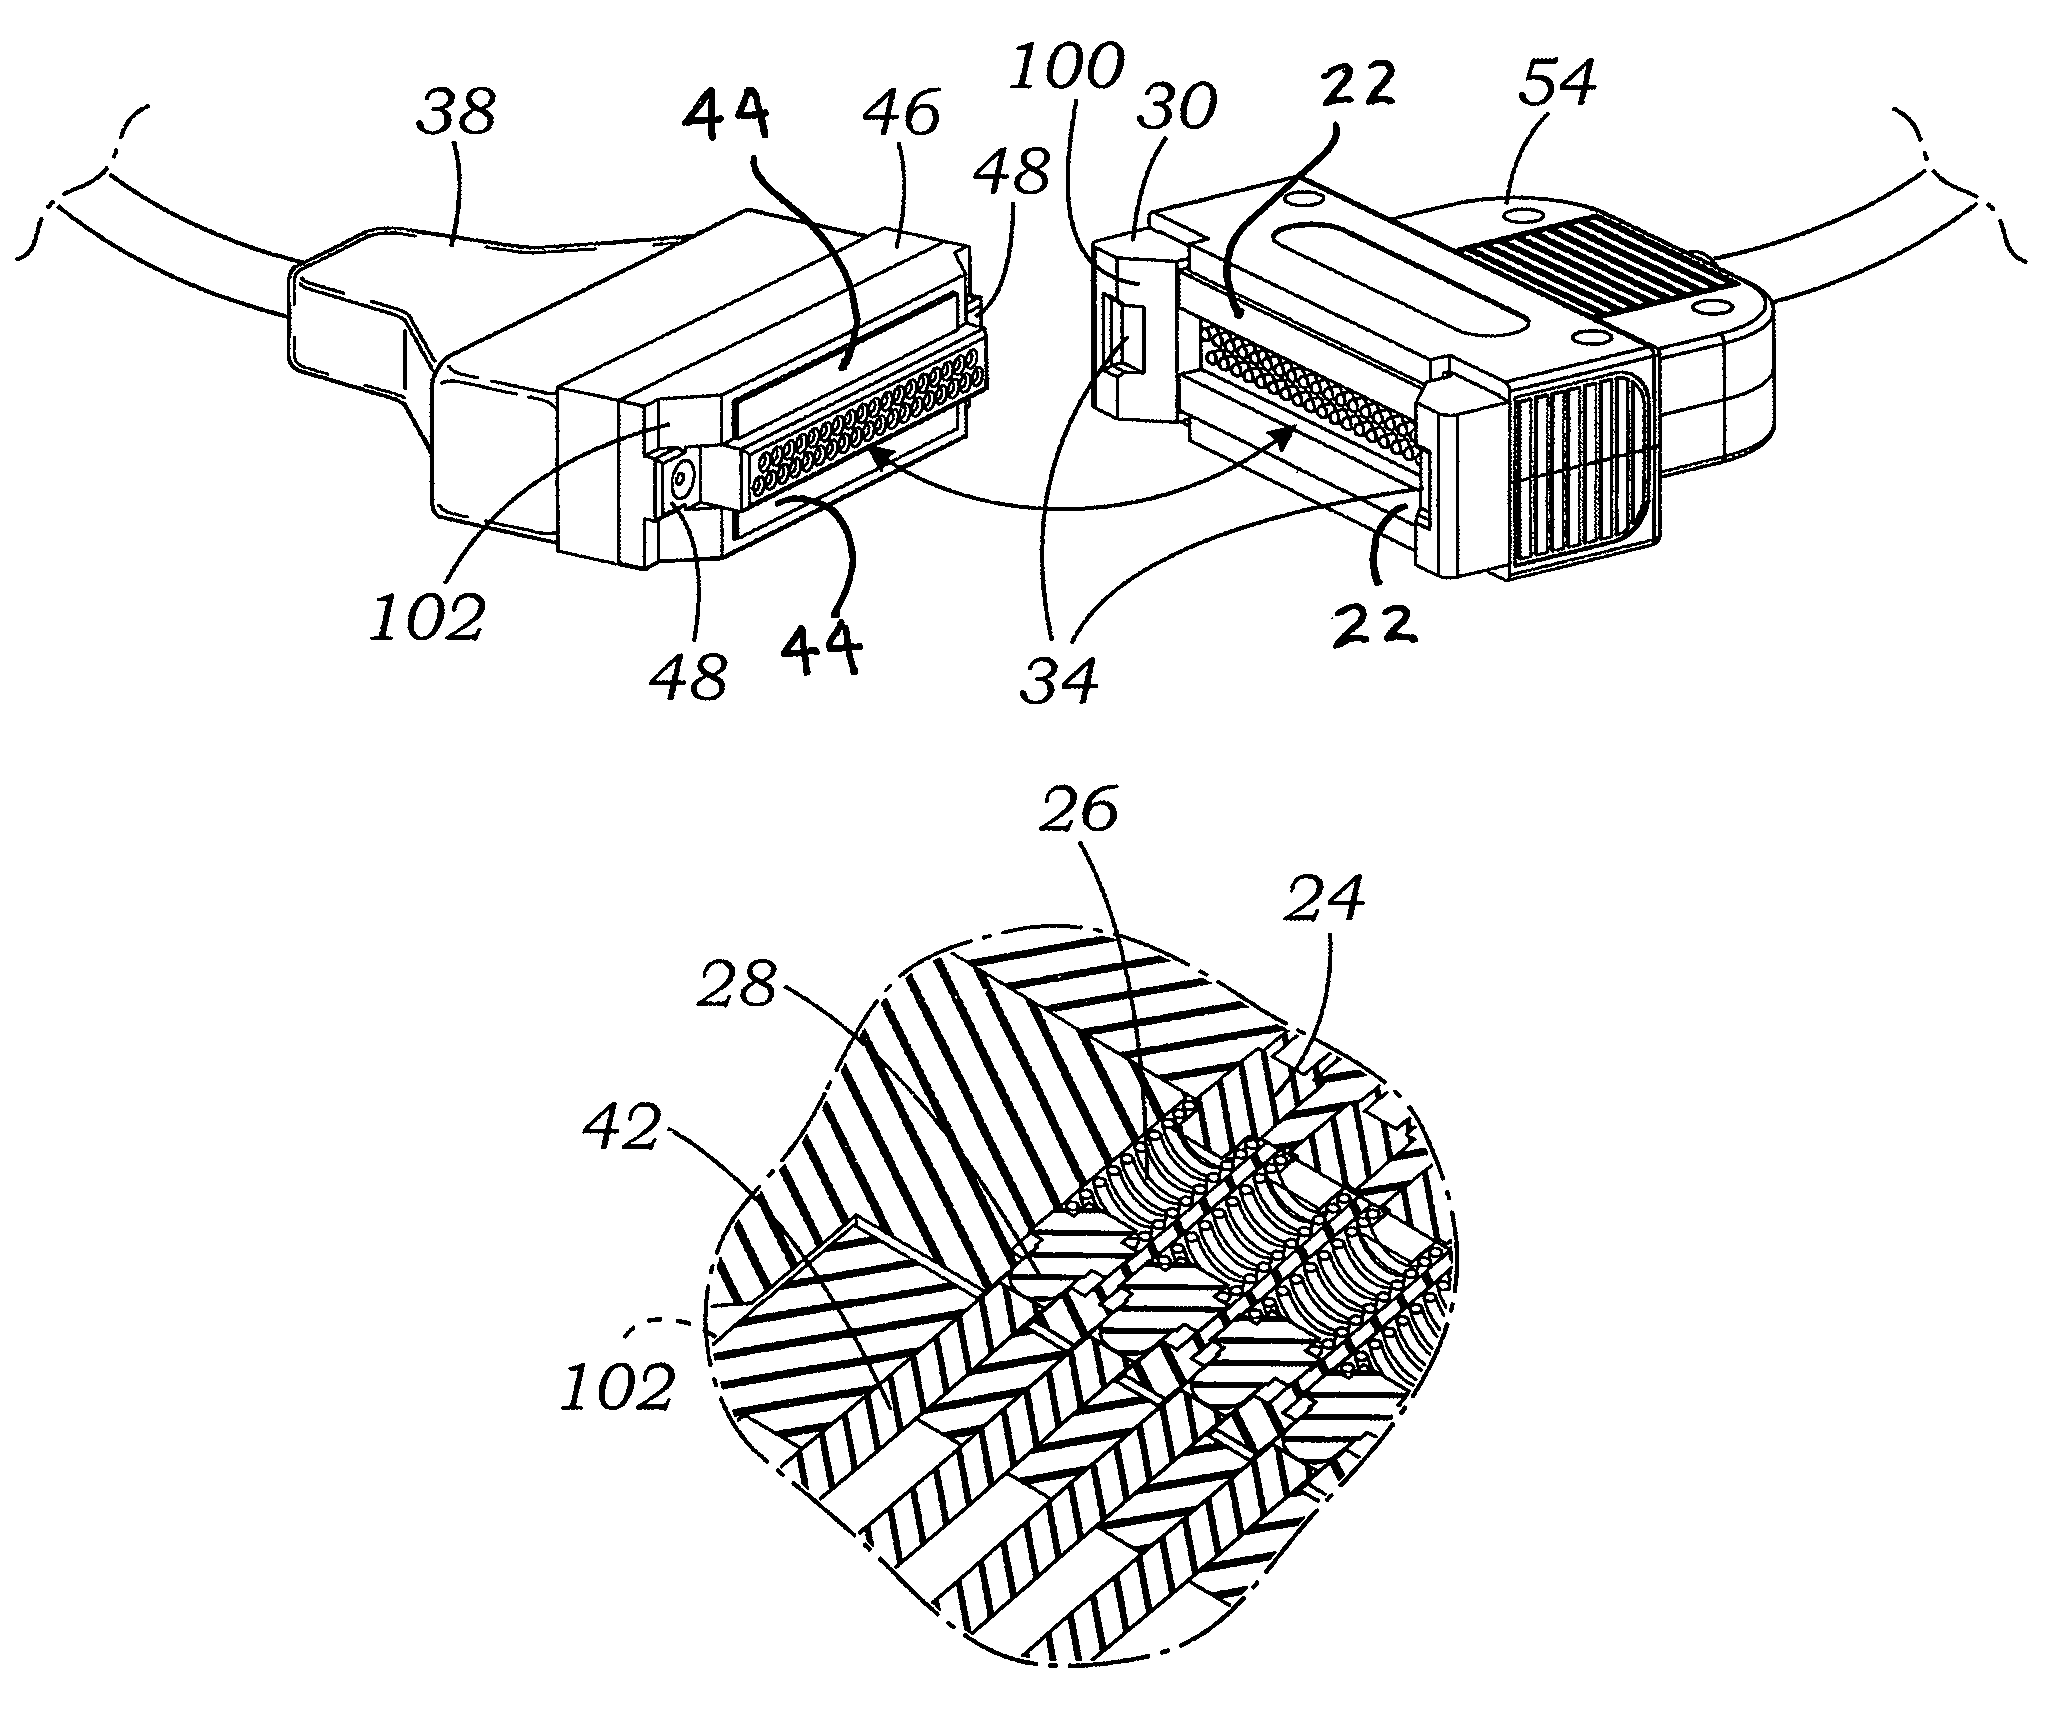 Magnetic-enabled connector device